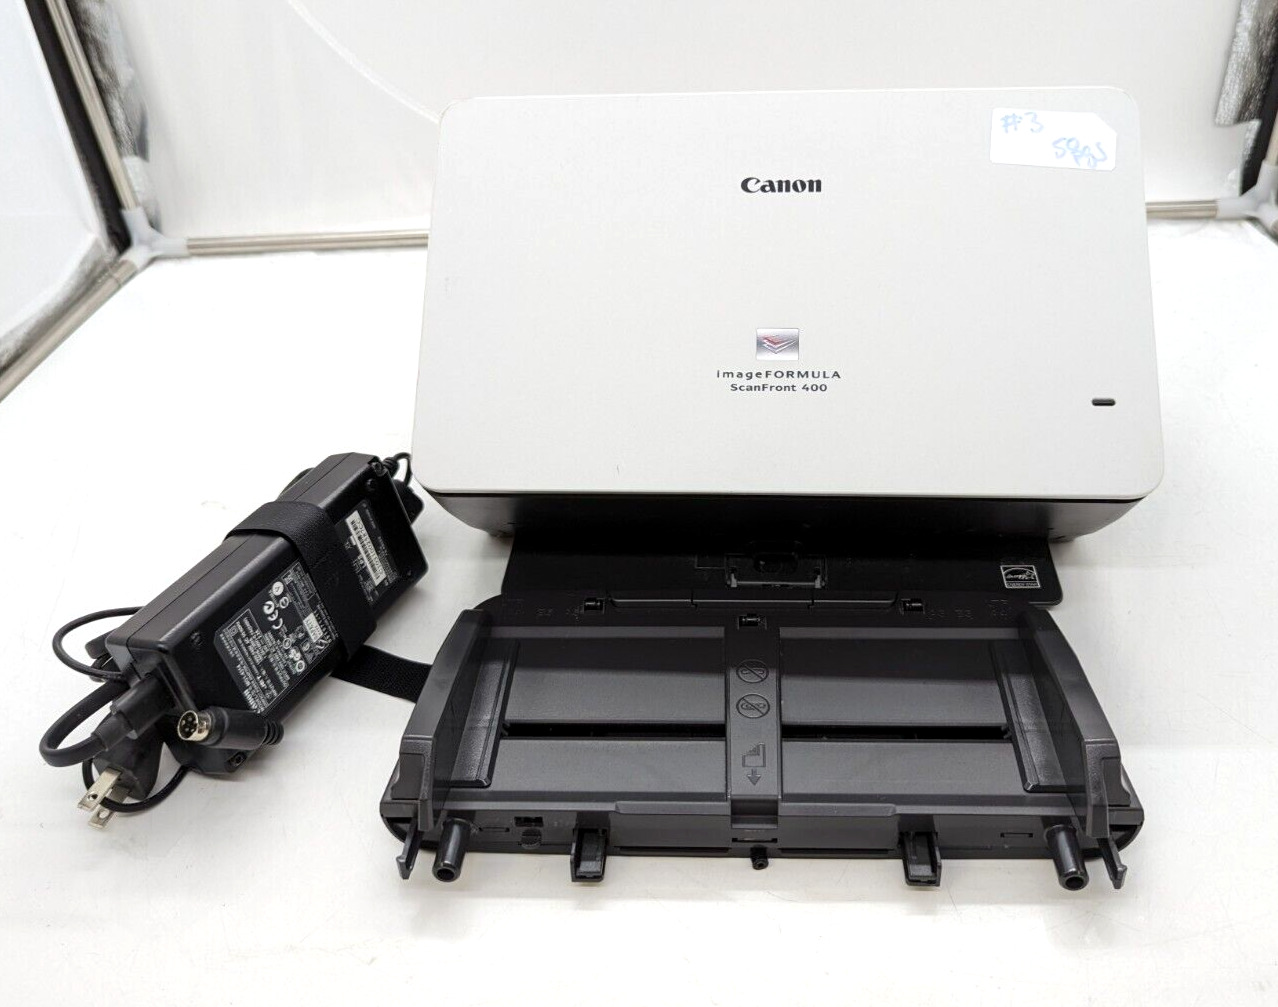 CANON IMAGE FORMULA SCANFRONT 400 - USED - 50 SCANS #3